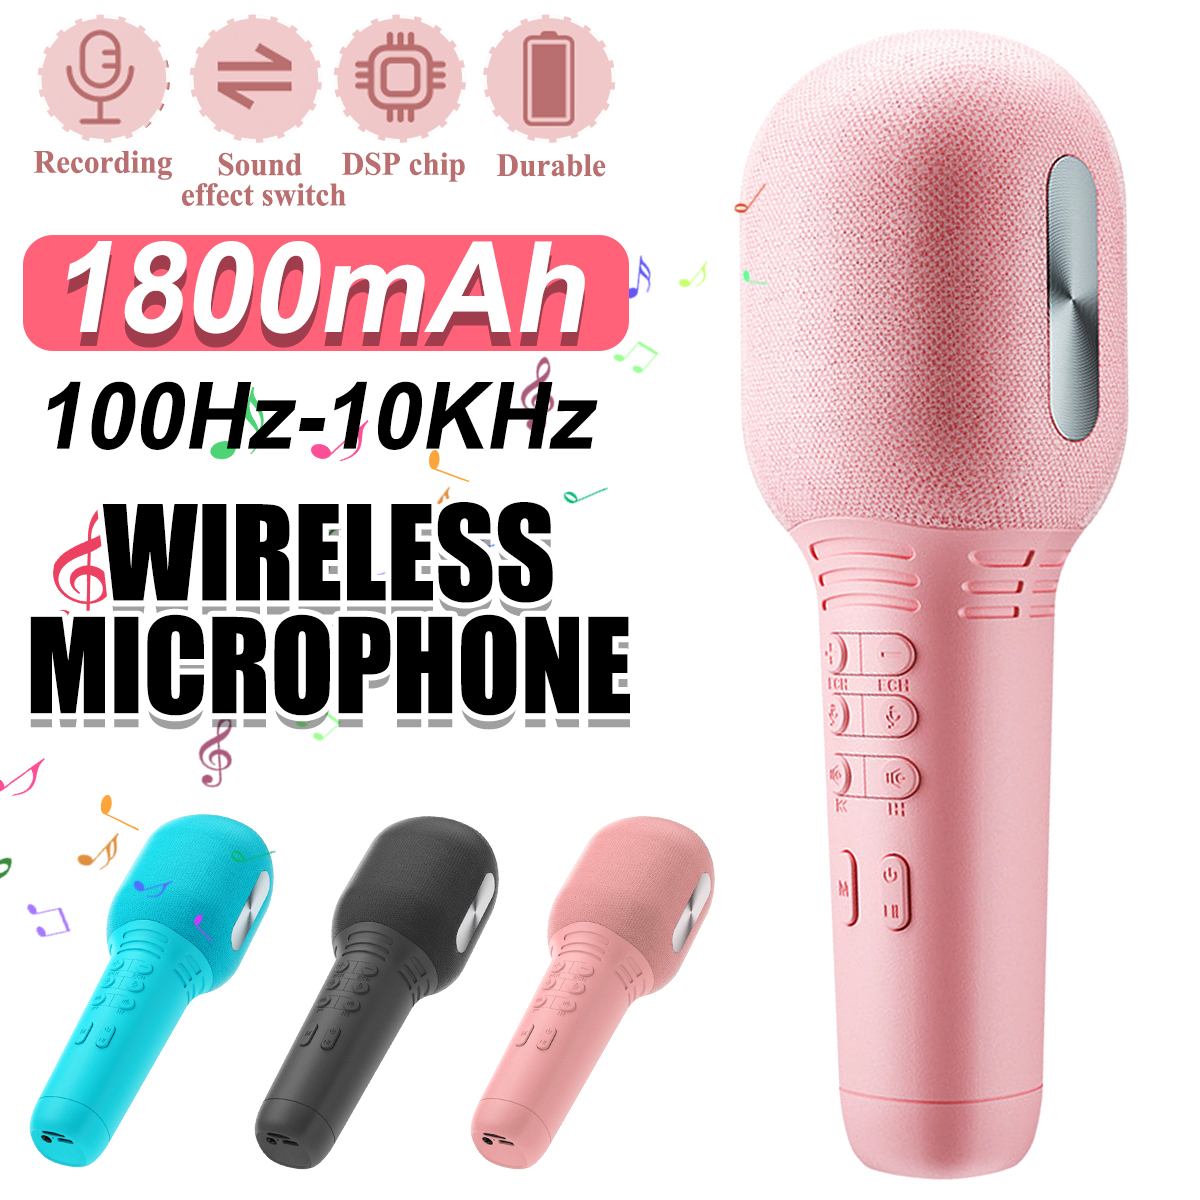 Wireless-Microphone-bluetooth-V50-Low-Latency-1800mAh-Battery-Portable-Audio-Video-Recording-Mic-for-1965351-3